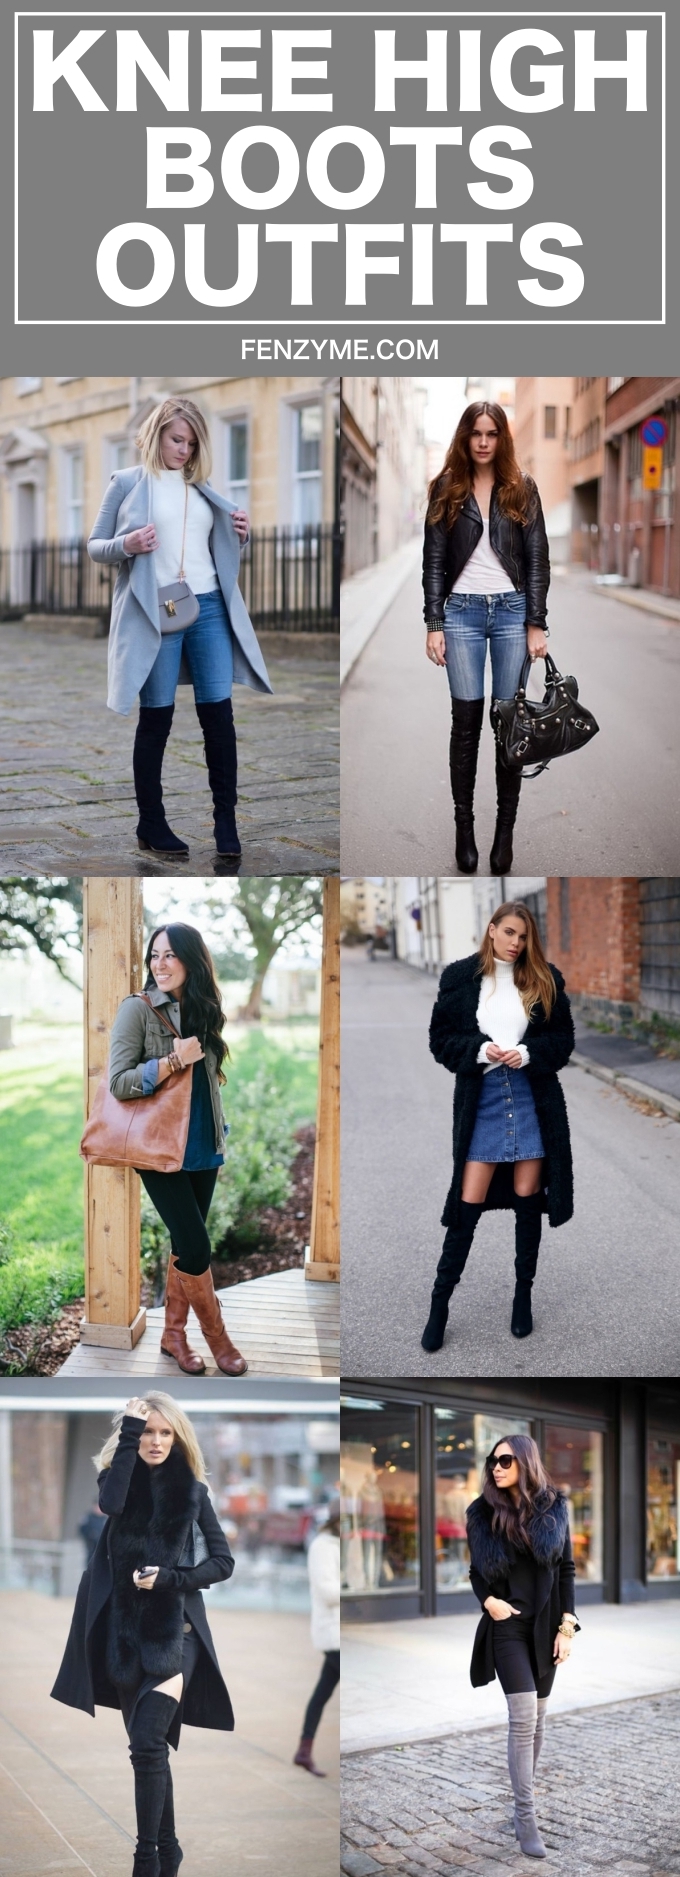 winter dresses with knee high boots